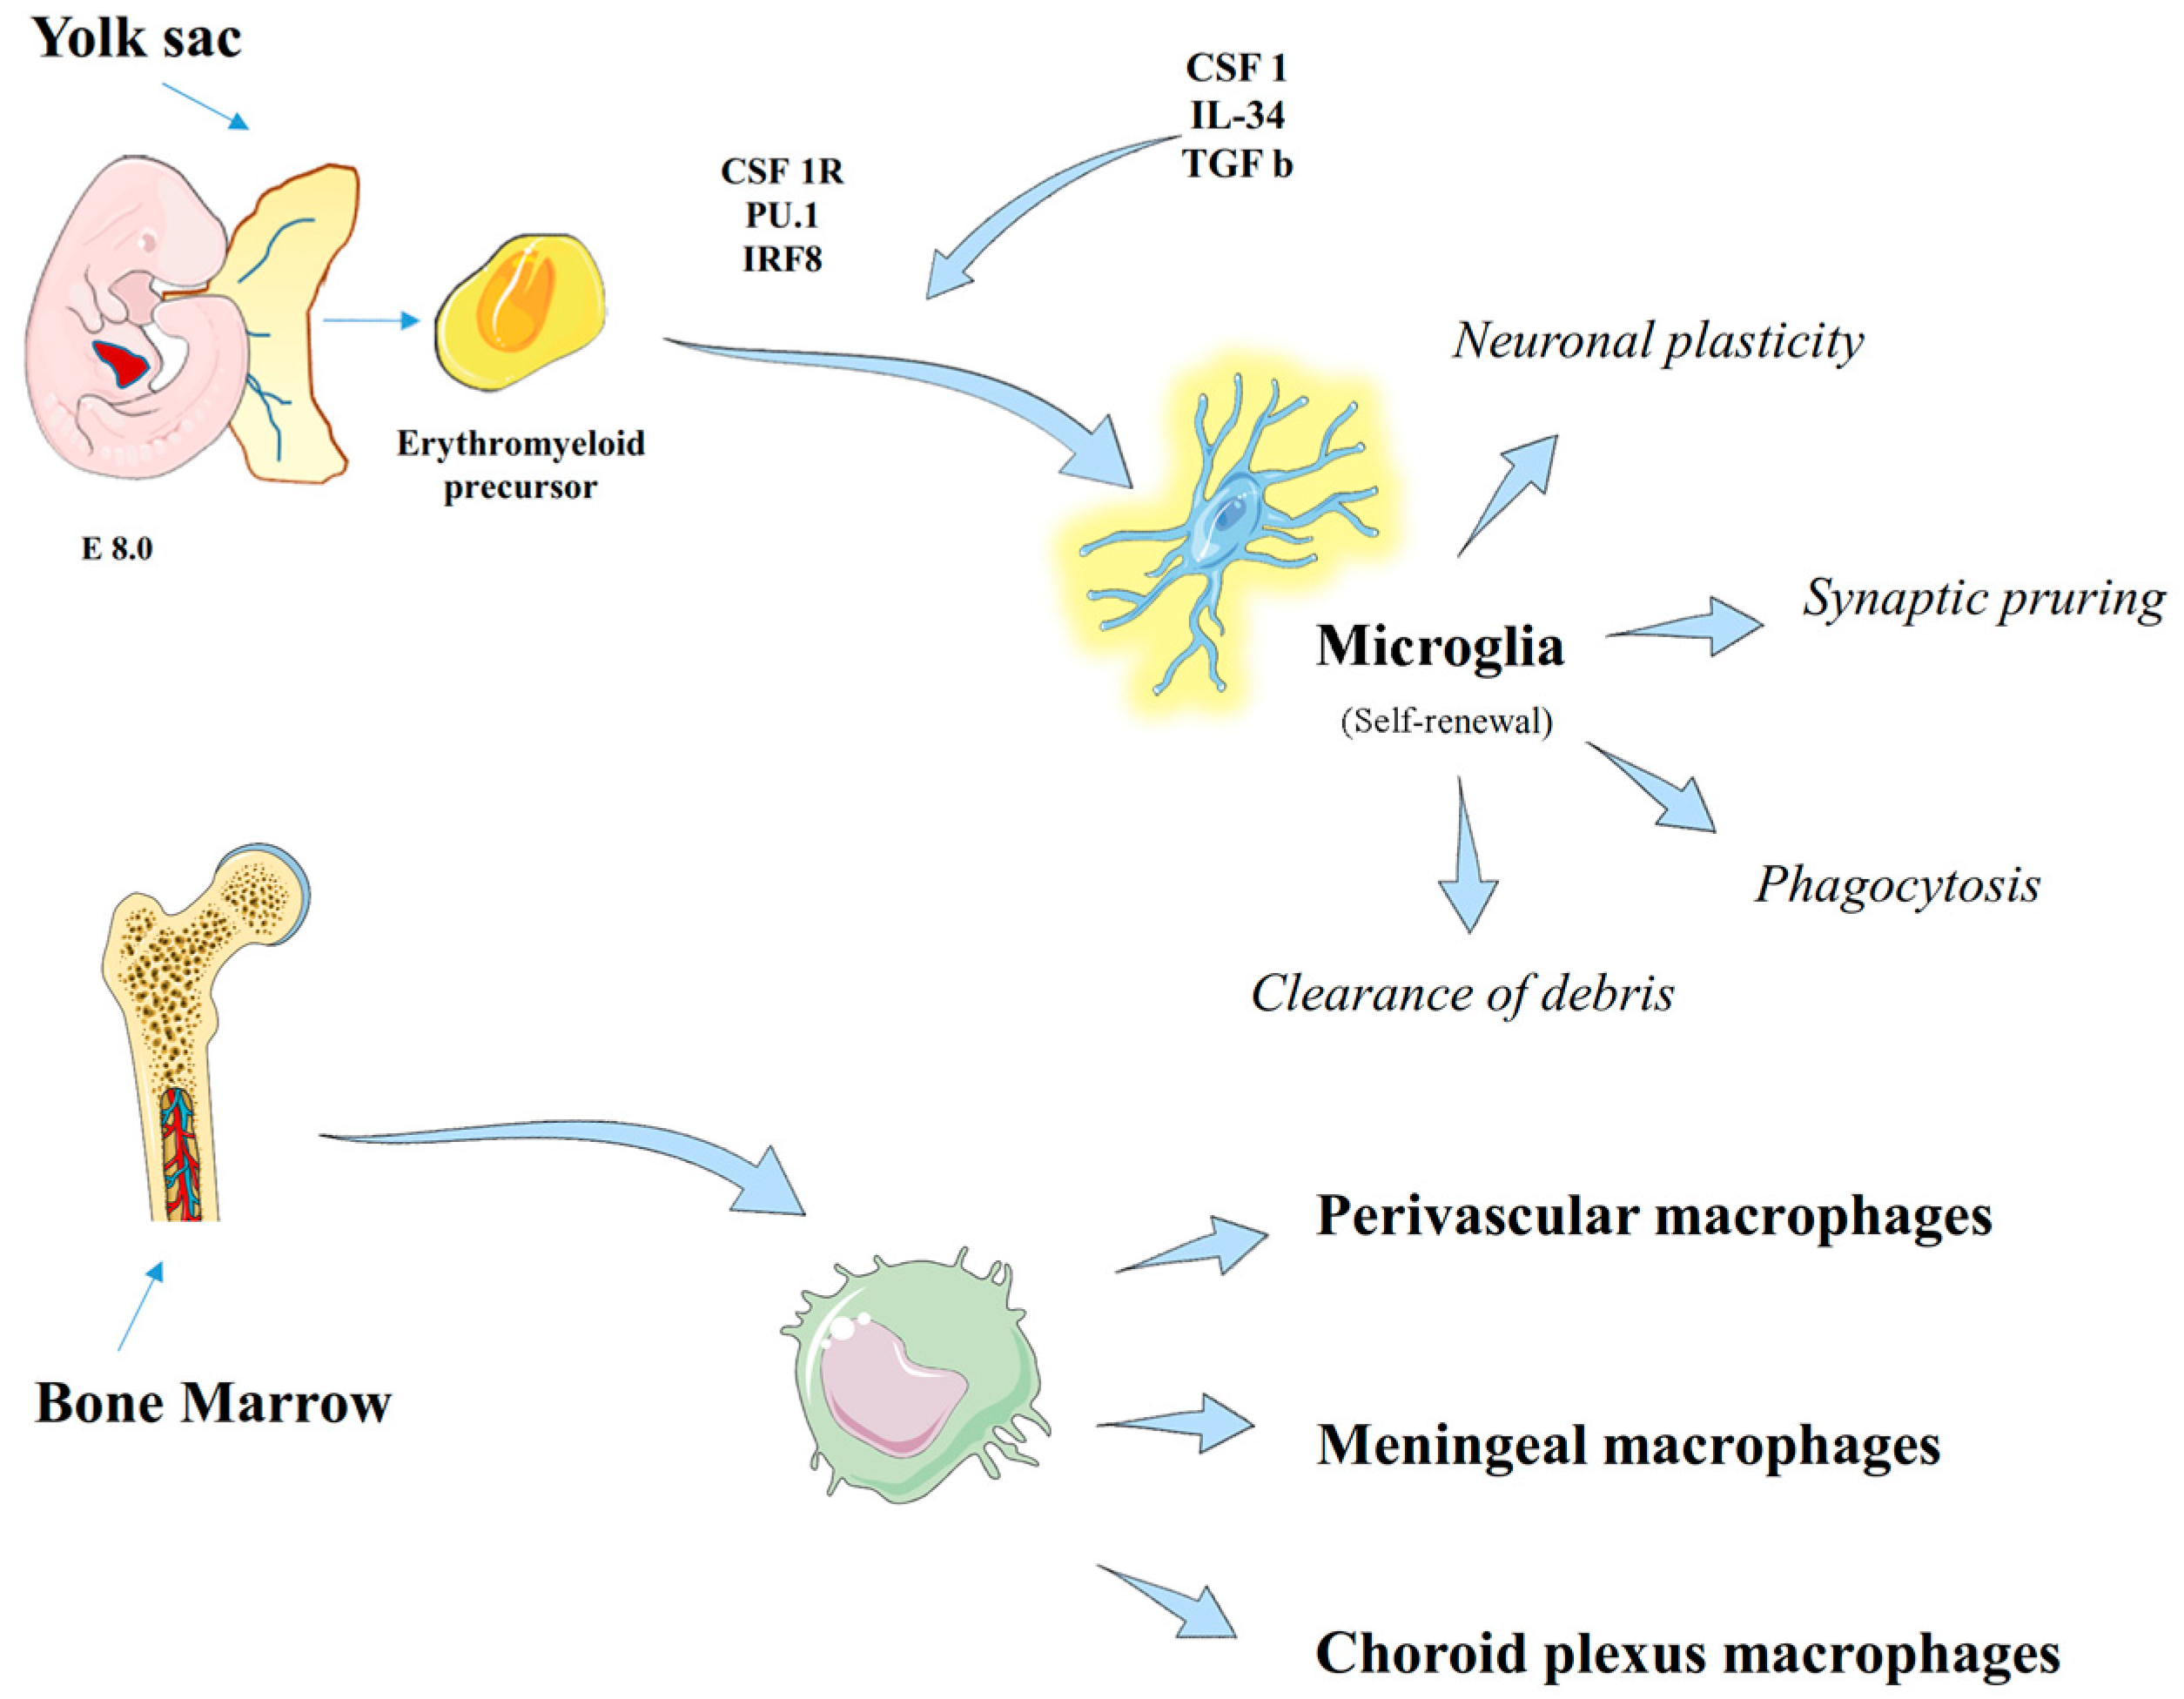 IJMS | Free Full-Text | The Role of Macrophages in Neuroinflammatory and  Neurodegenerative Pathways of Alzheimer's Disease, Amyotrophic Lateral  Sclerosis, and Multiple Sclerosis: Pathogenetic Cellular Effectors and  Potential Therapeutic Targets | HTML